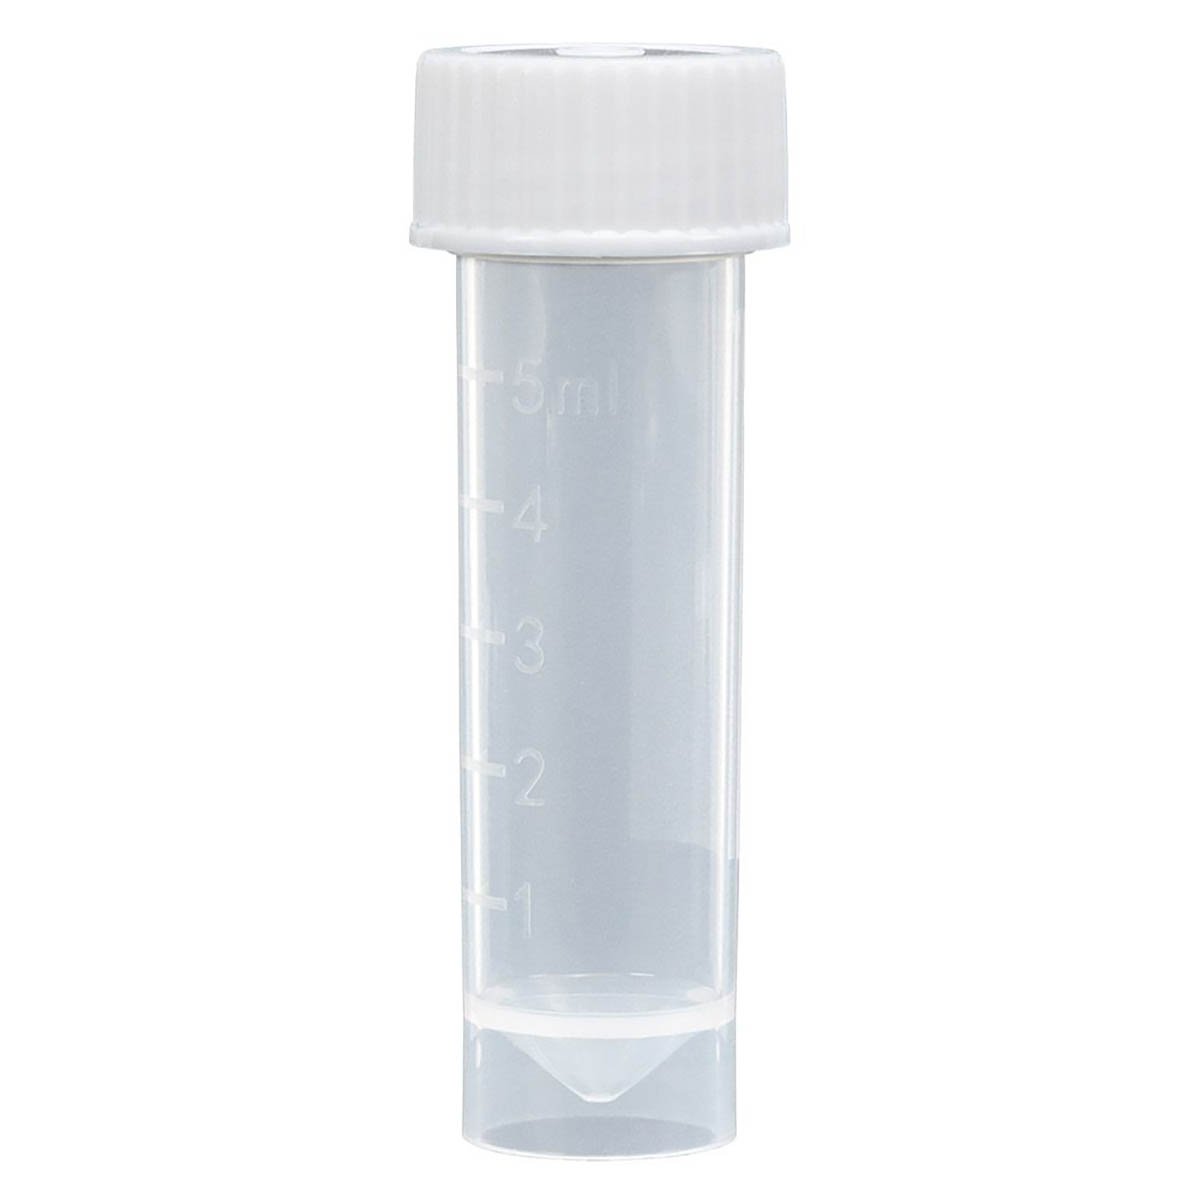 Transport Tubes 5mL - PP Self-Standing Conical Bottom with Attached PE White Screw Cap (Case of 1000)